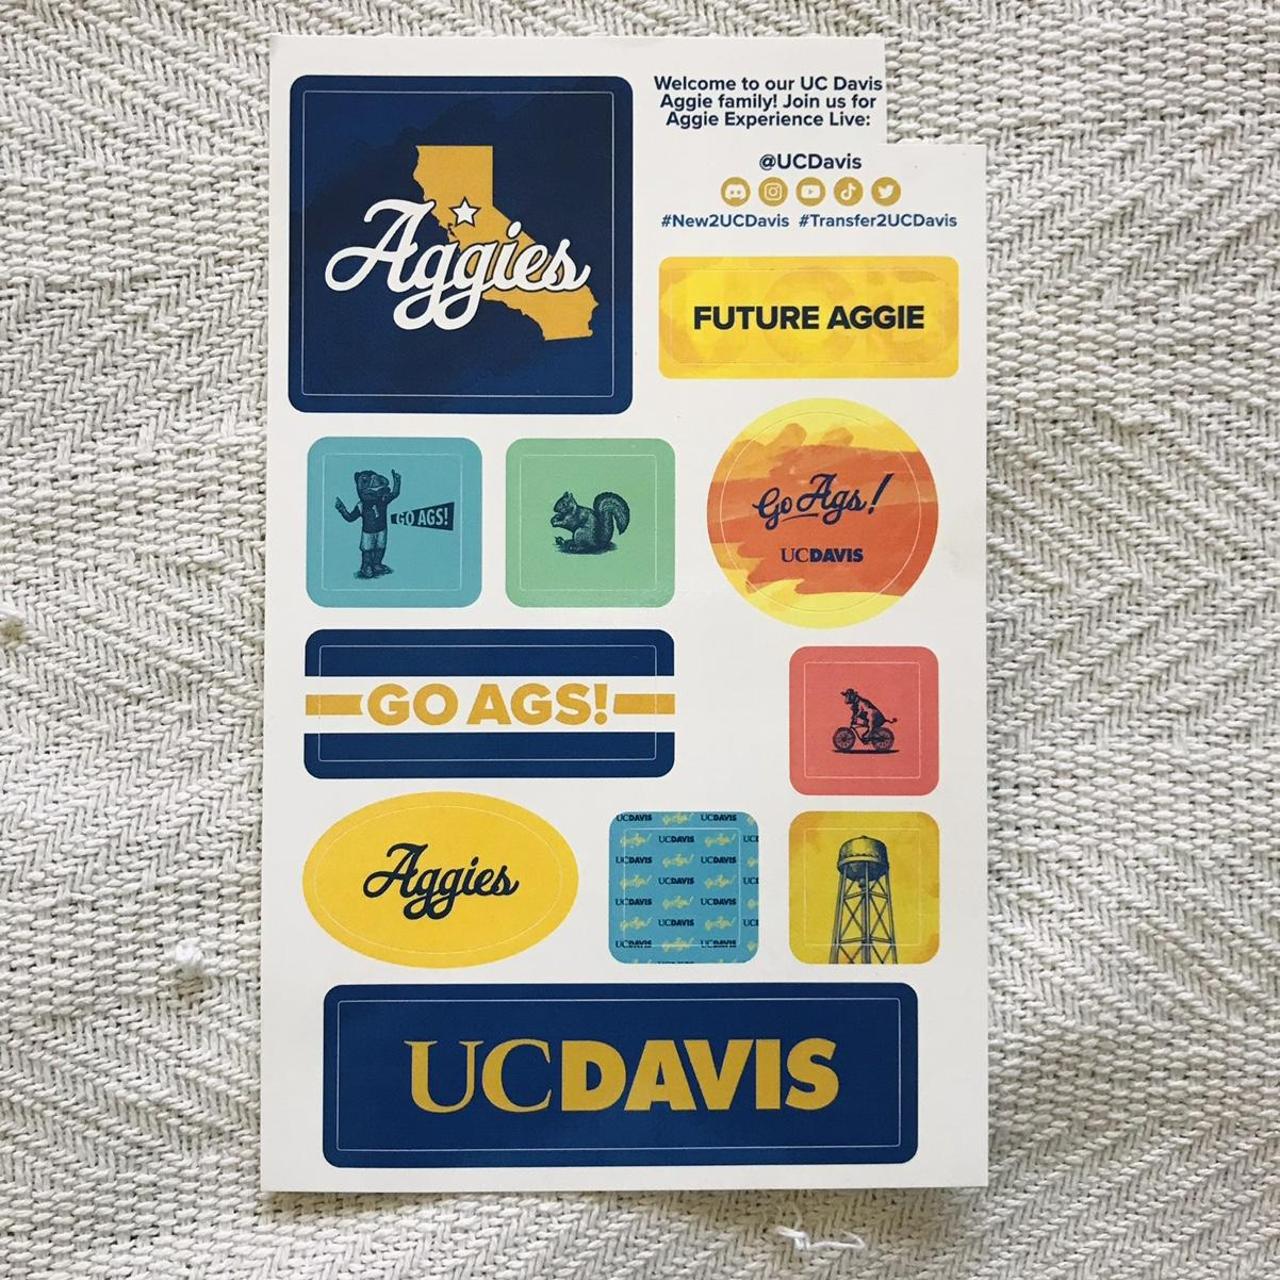 Product Image 1 - UC DAVIS STICKERS 💛📚

Great gift